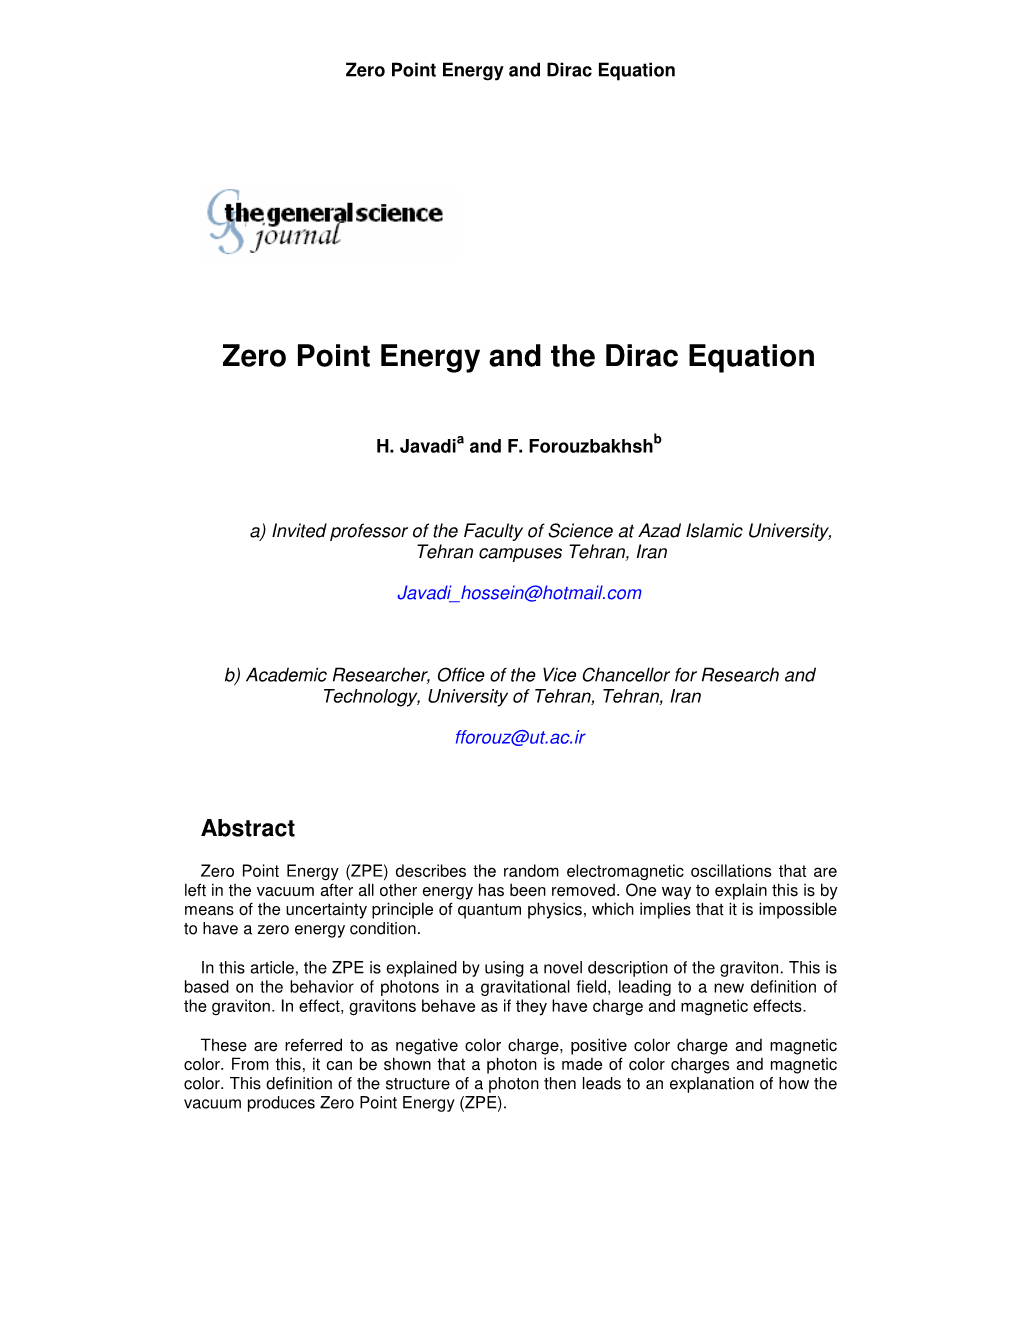 Zero Point Energy and the Dirac Equation